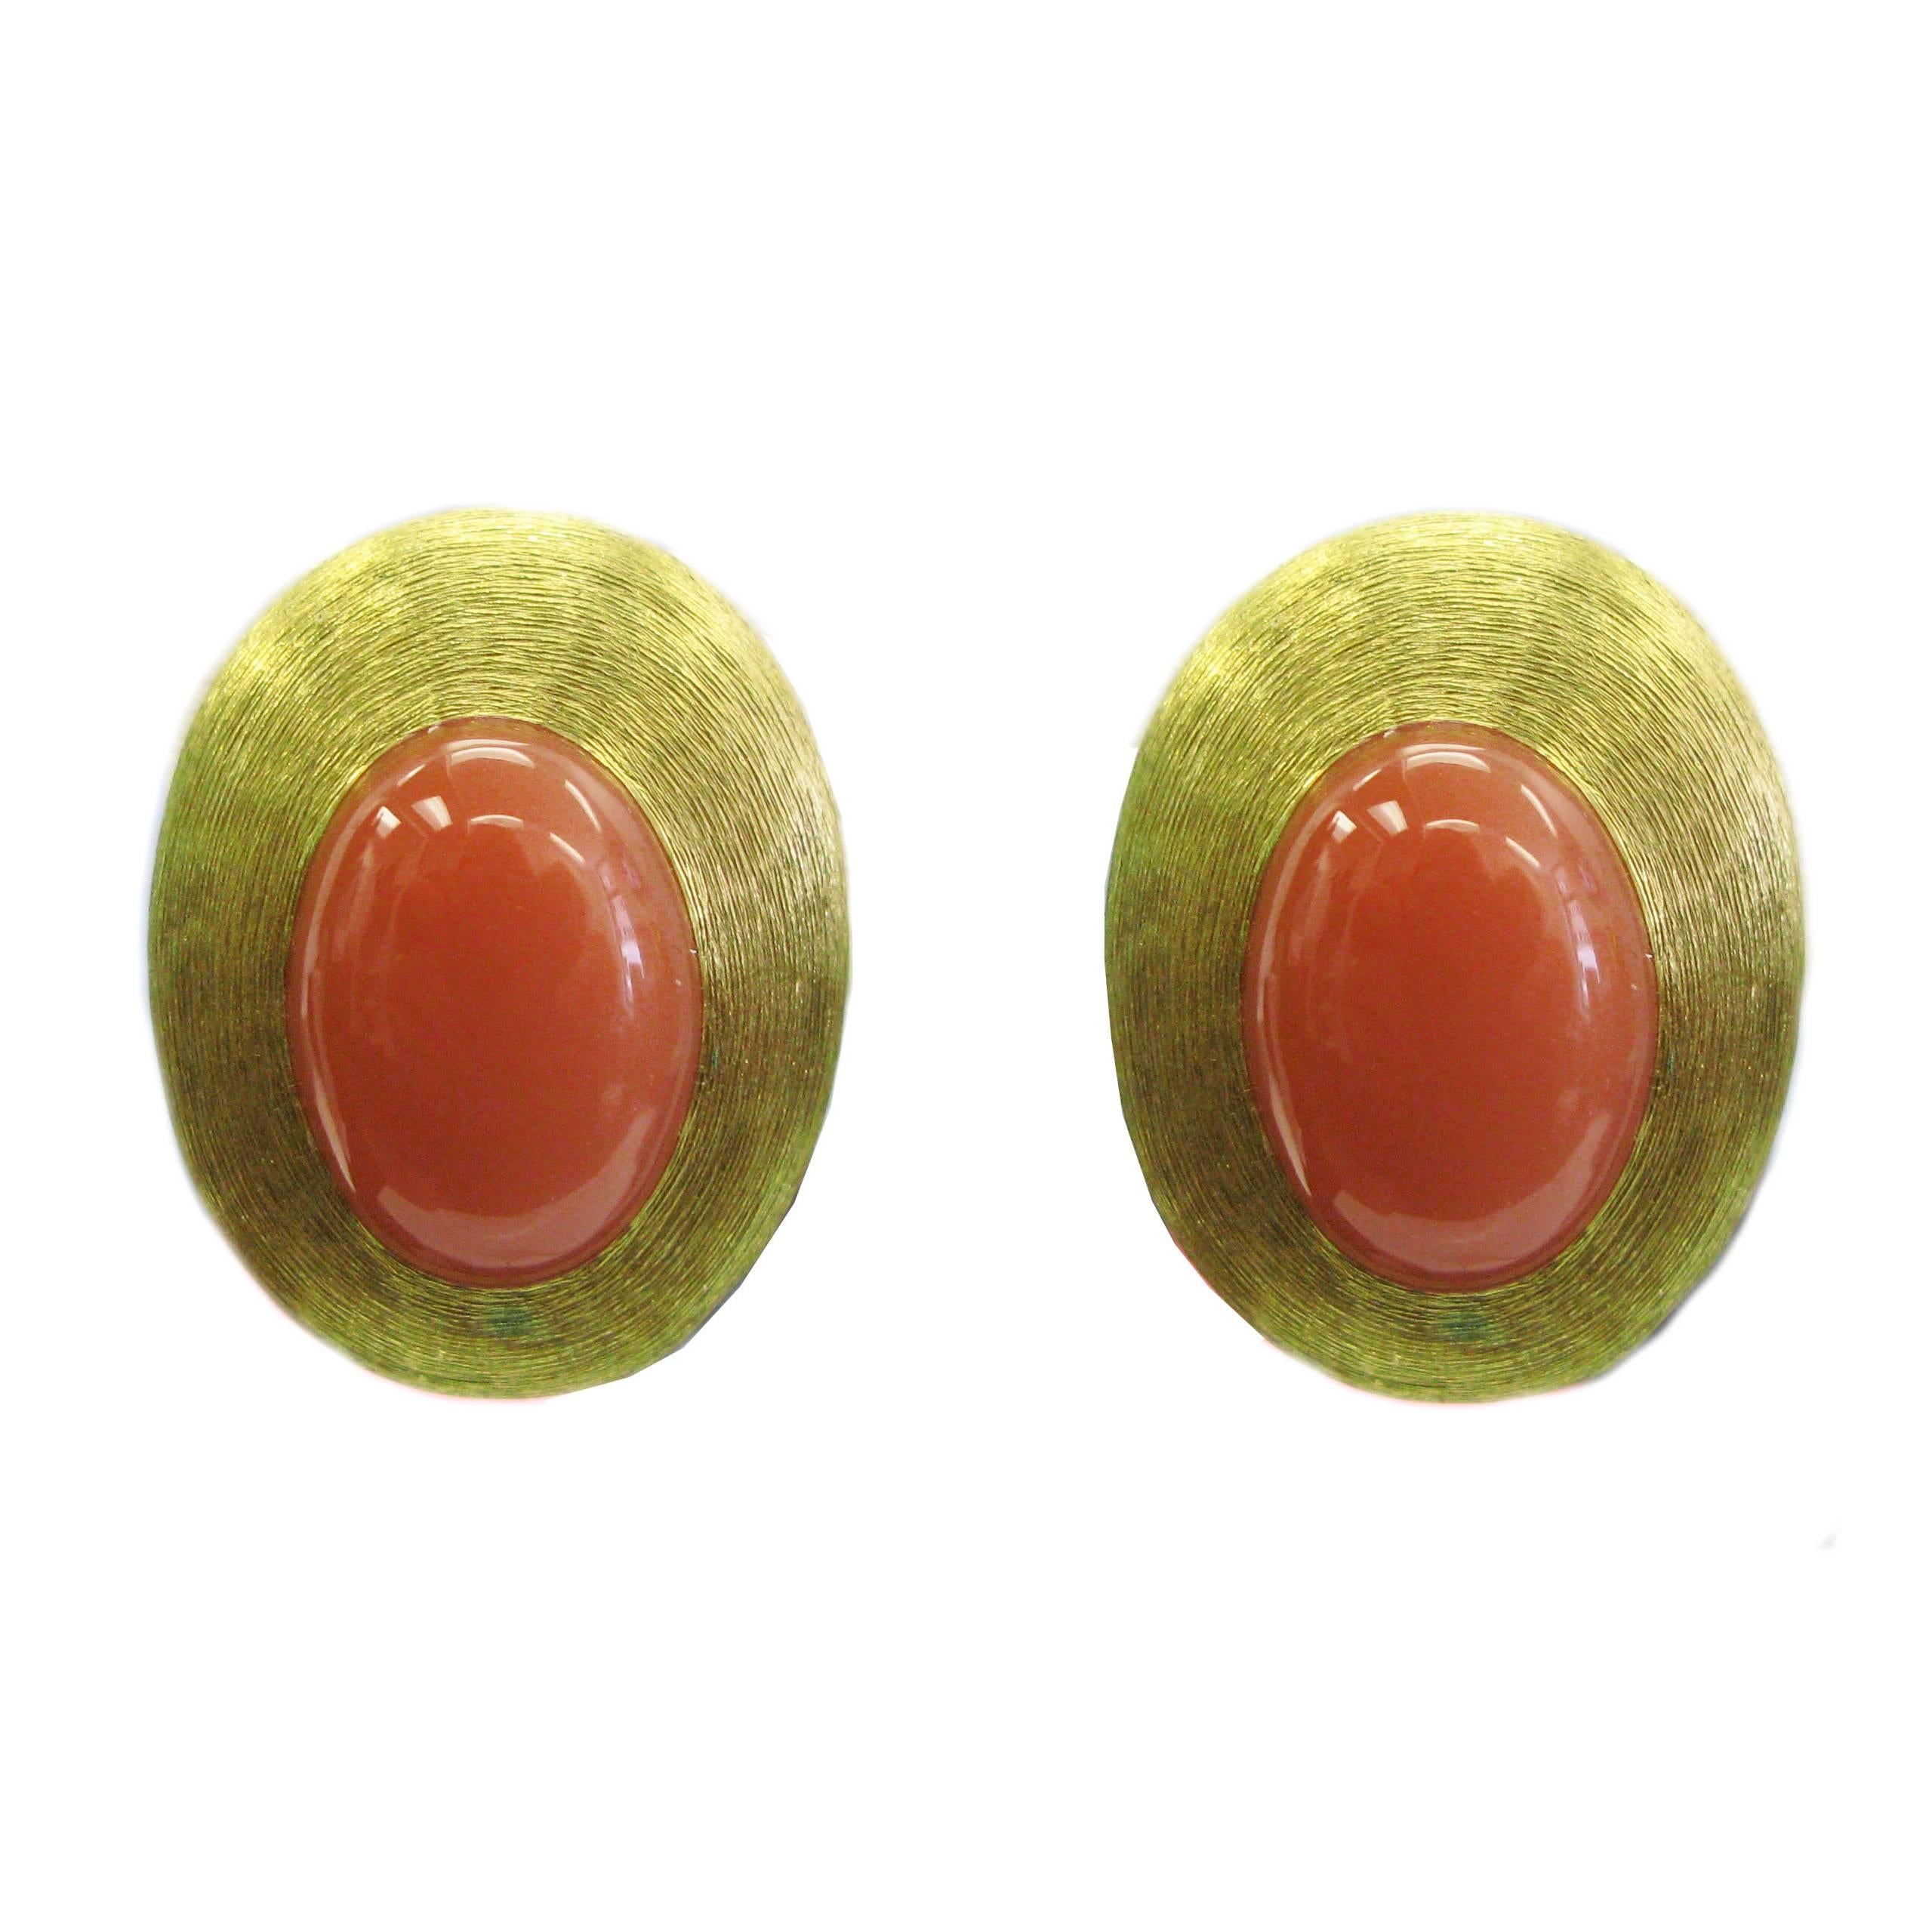 Henry Dunay Moonstone Gold Ear Clips